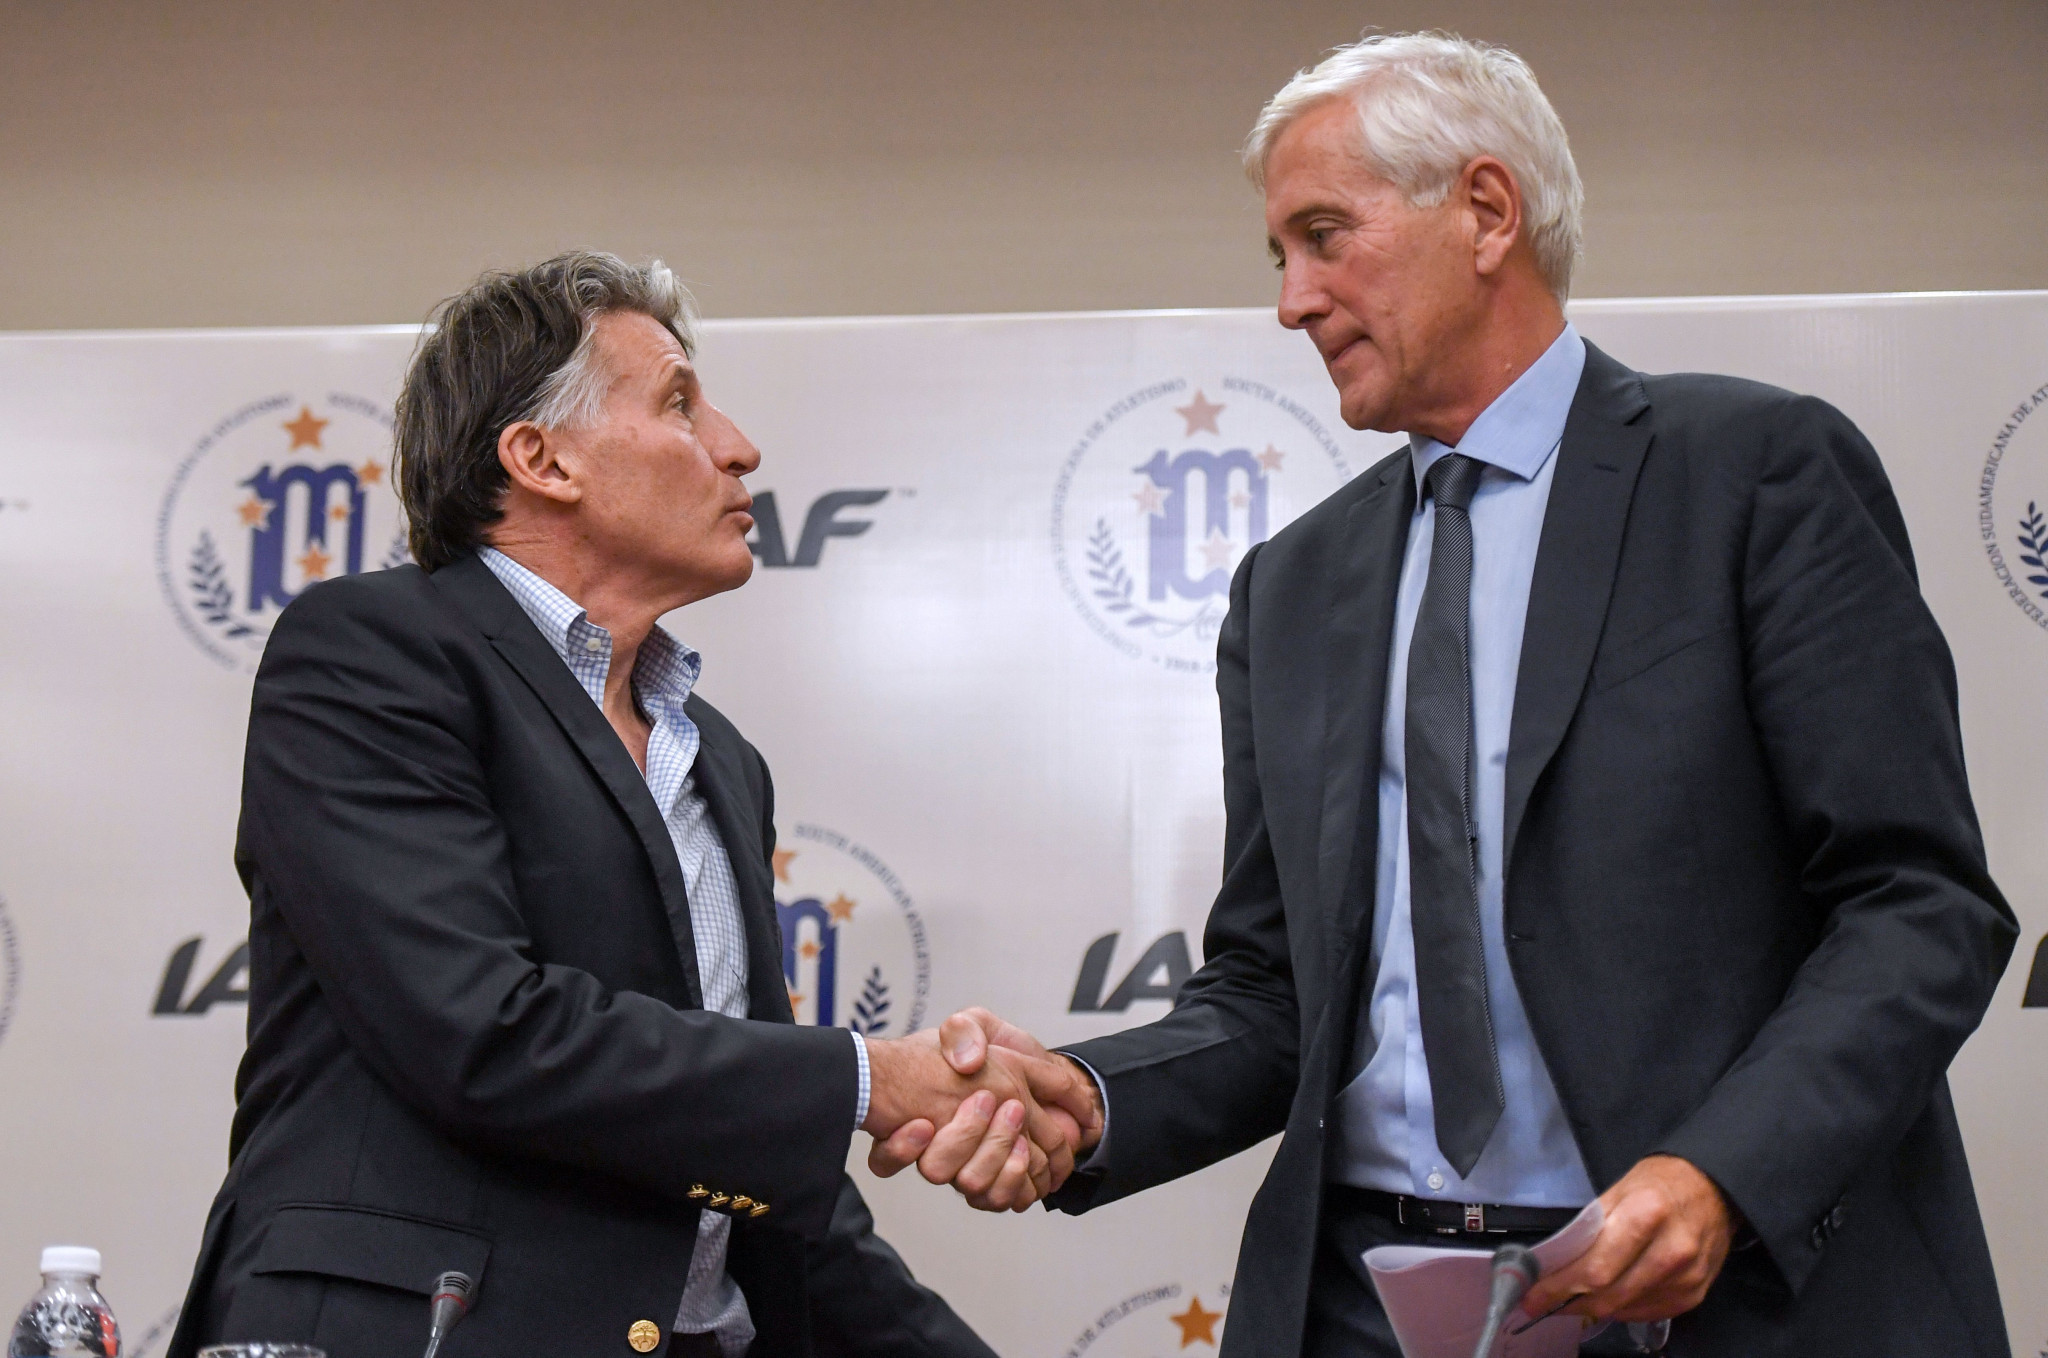 Sebastian Coe and Rune Andersen shake hands following the IAAF Council meeting in Buenos Aires today ©Getty Images